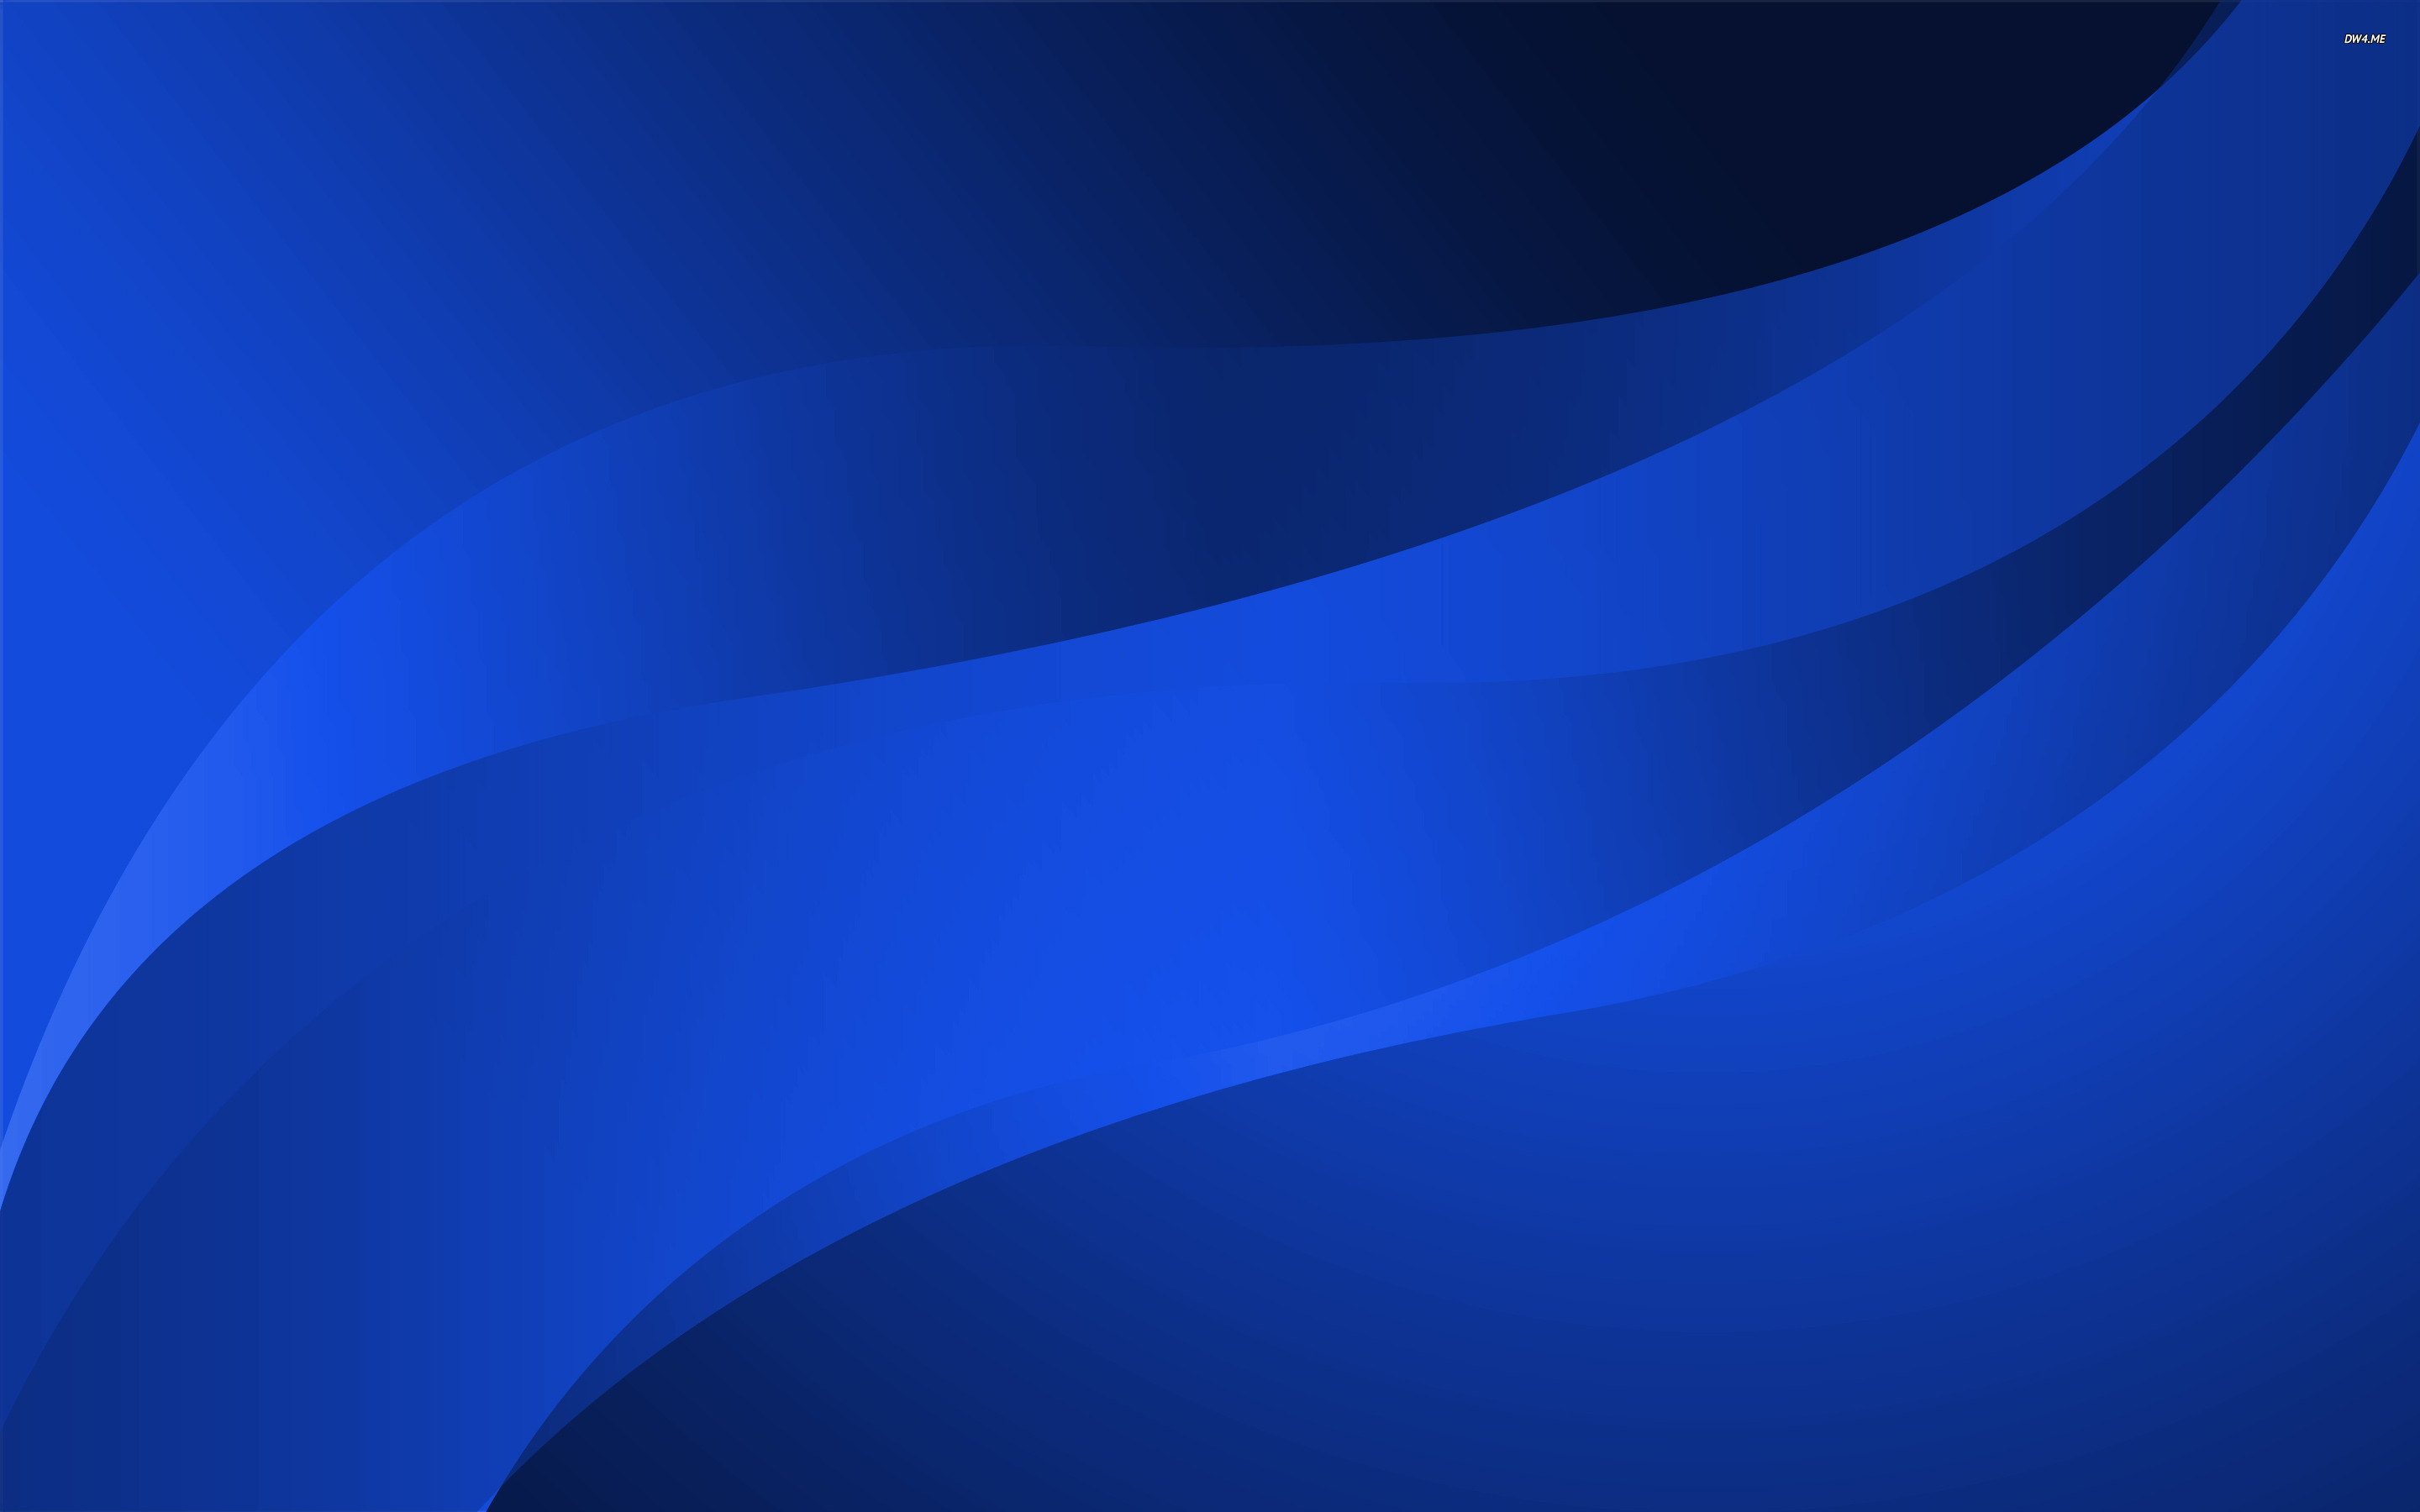 Free Download Dark Blue Hd Wallpapers 1080p Blue Curves 2880x1800